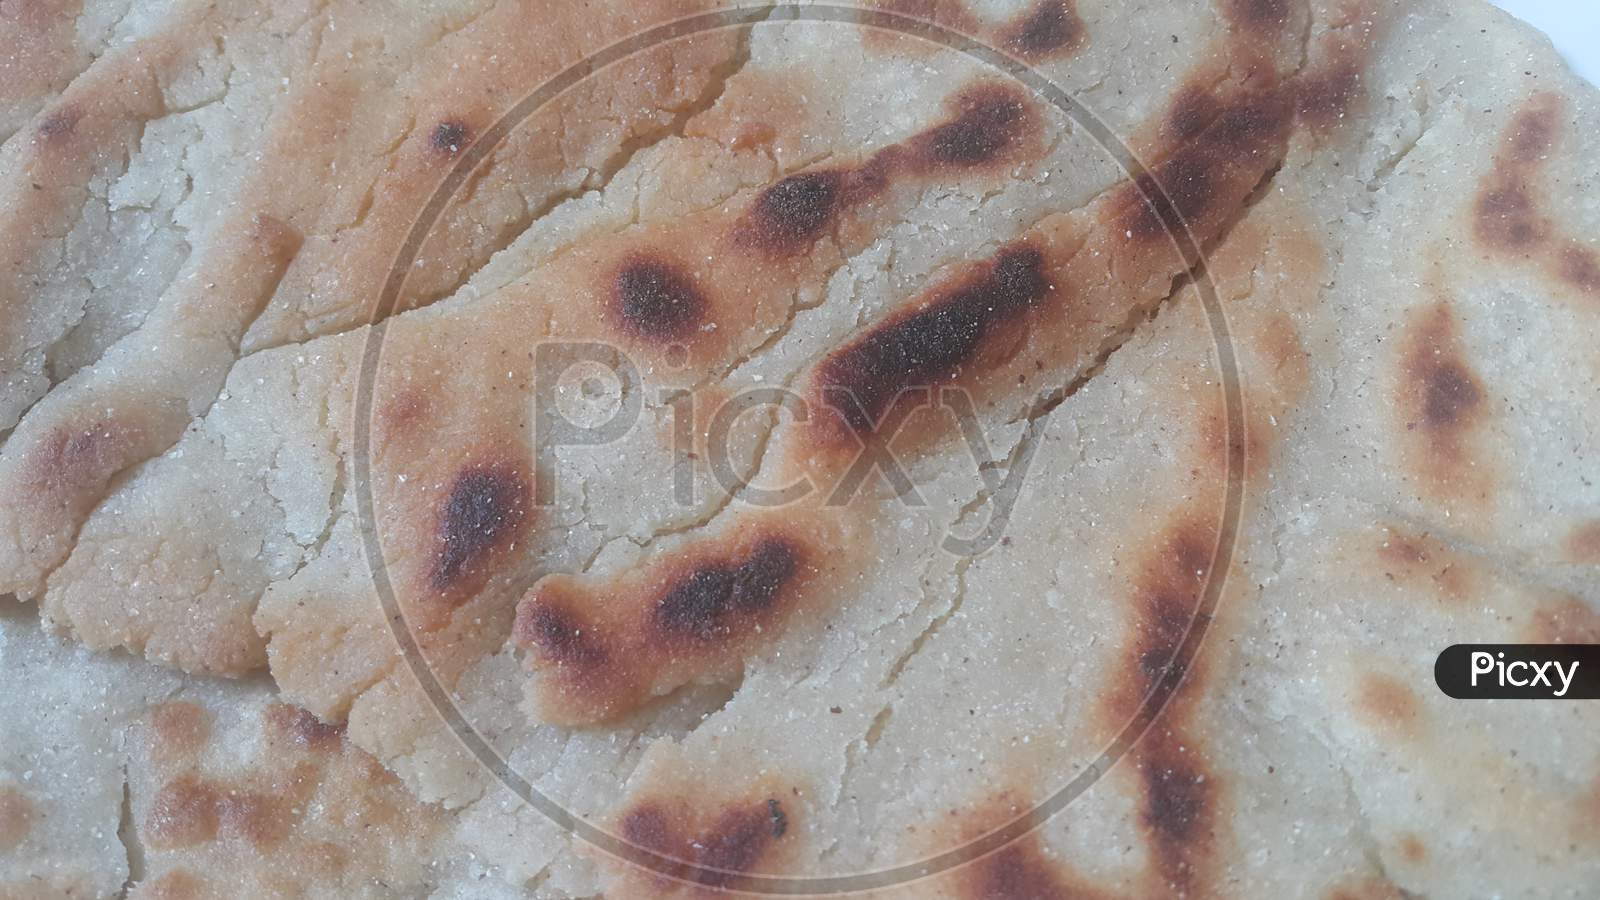 Closeup View Of Of Traditional Home Made Bread Called Jawar Roti Or Bhakri